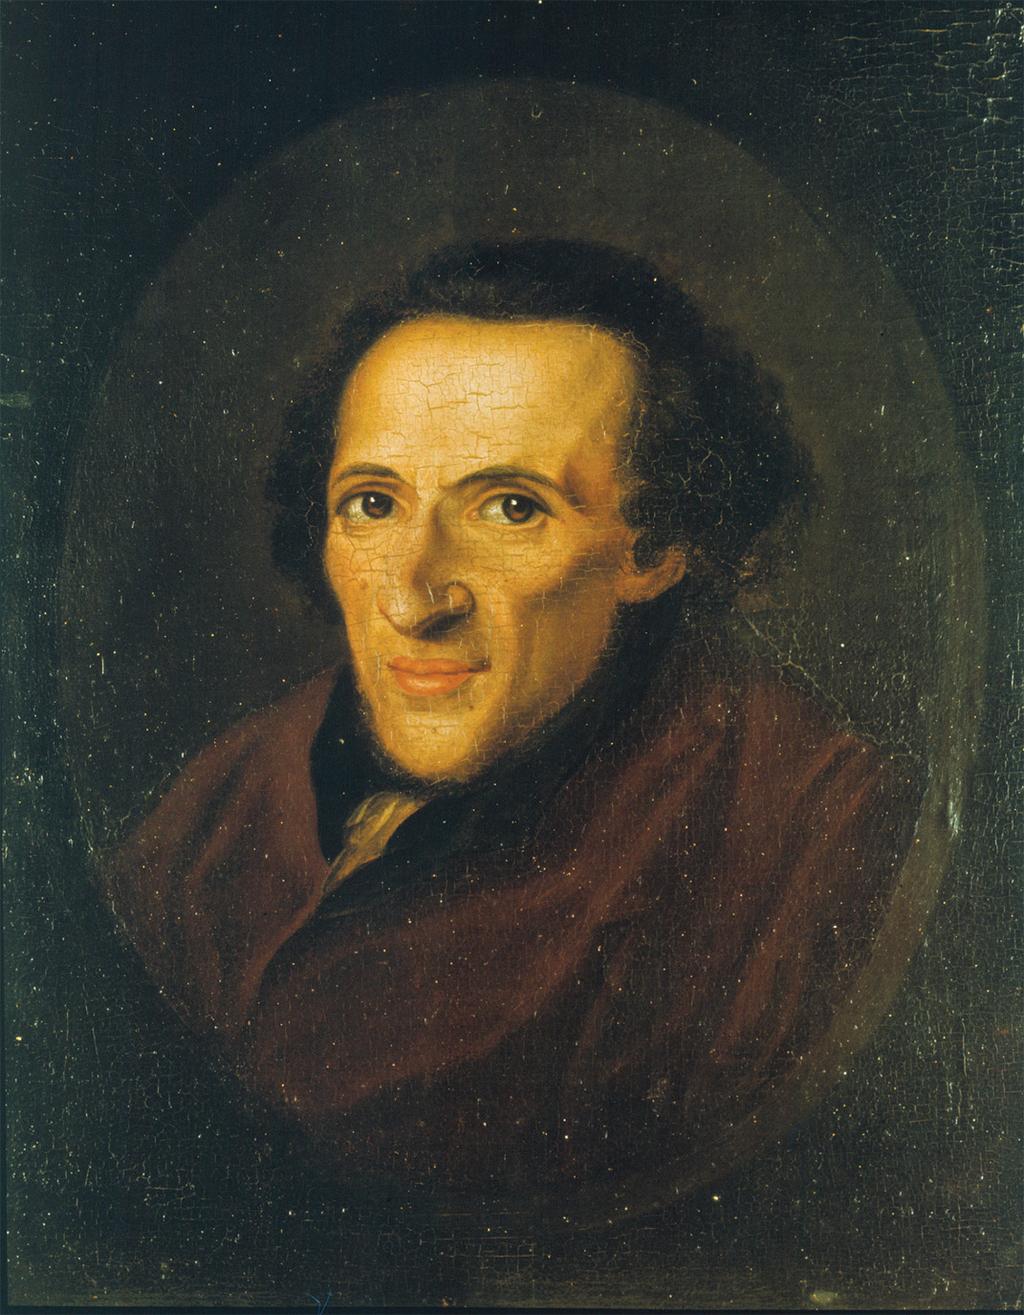 Moses Mendelssohn, the leading philosopher of the Jewish enlightenment, was often called the Jewish Socrates.